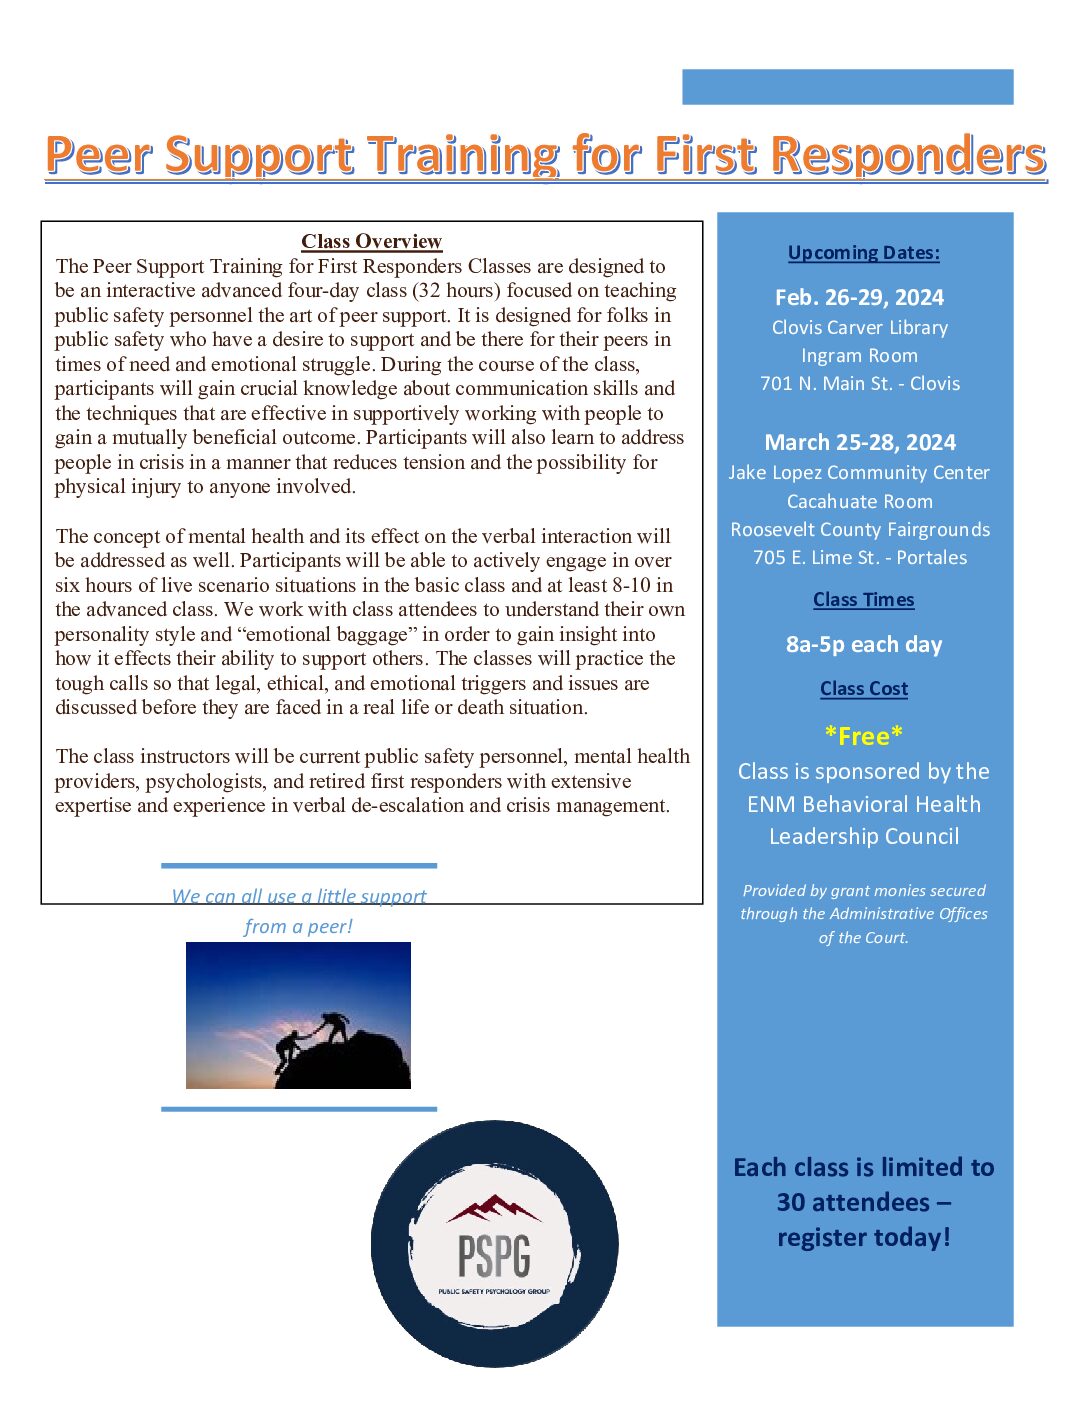 Peer Support for First Responders Training Classes